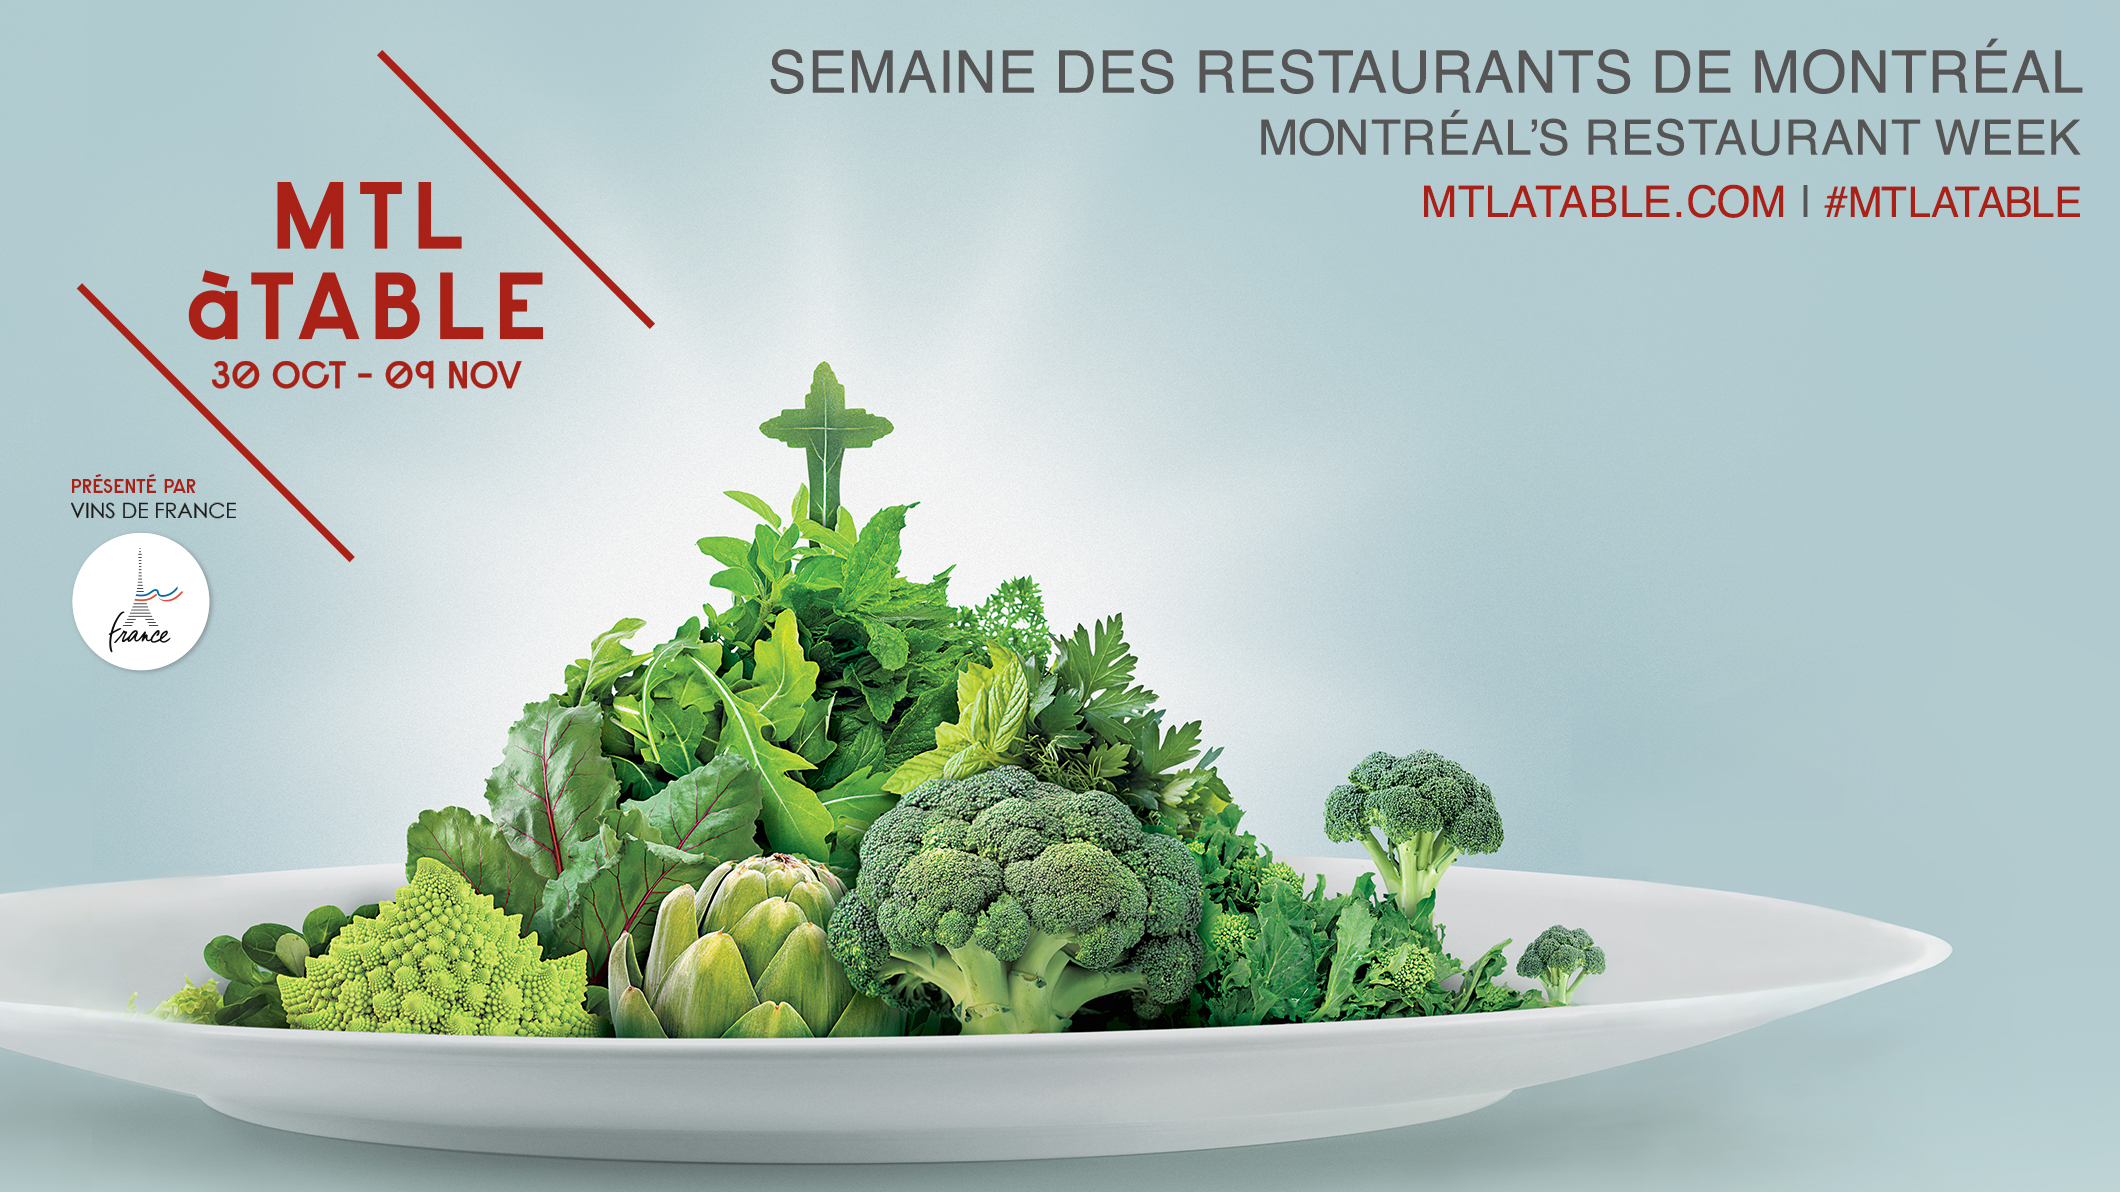 WE ARE OFFERING FREE DINNERS DURING MTL À TABLE